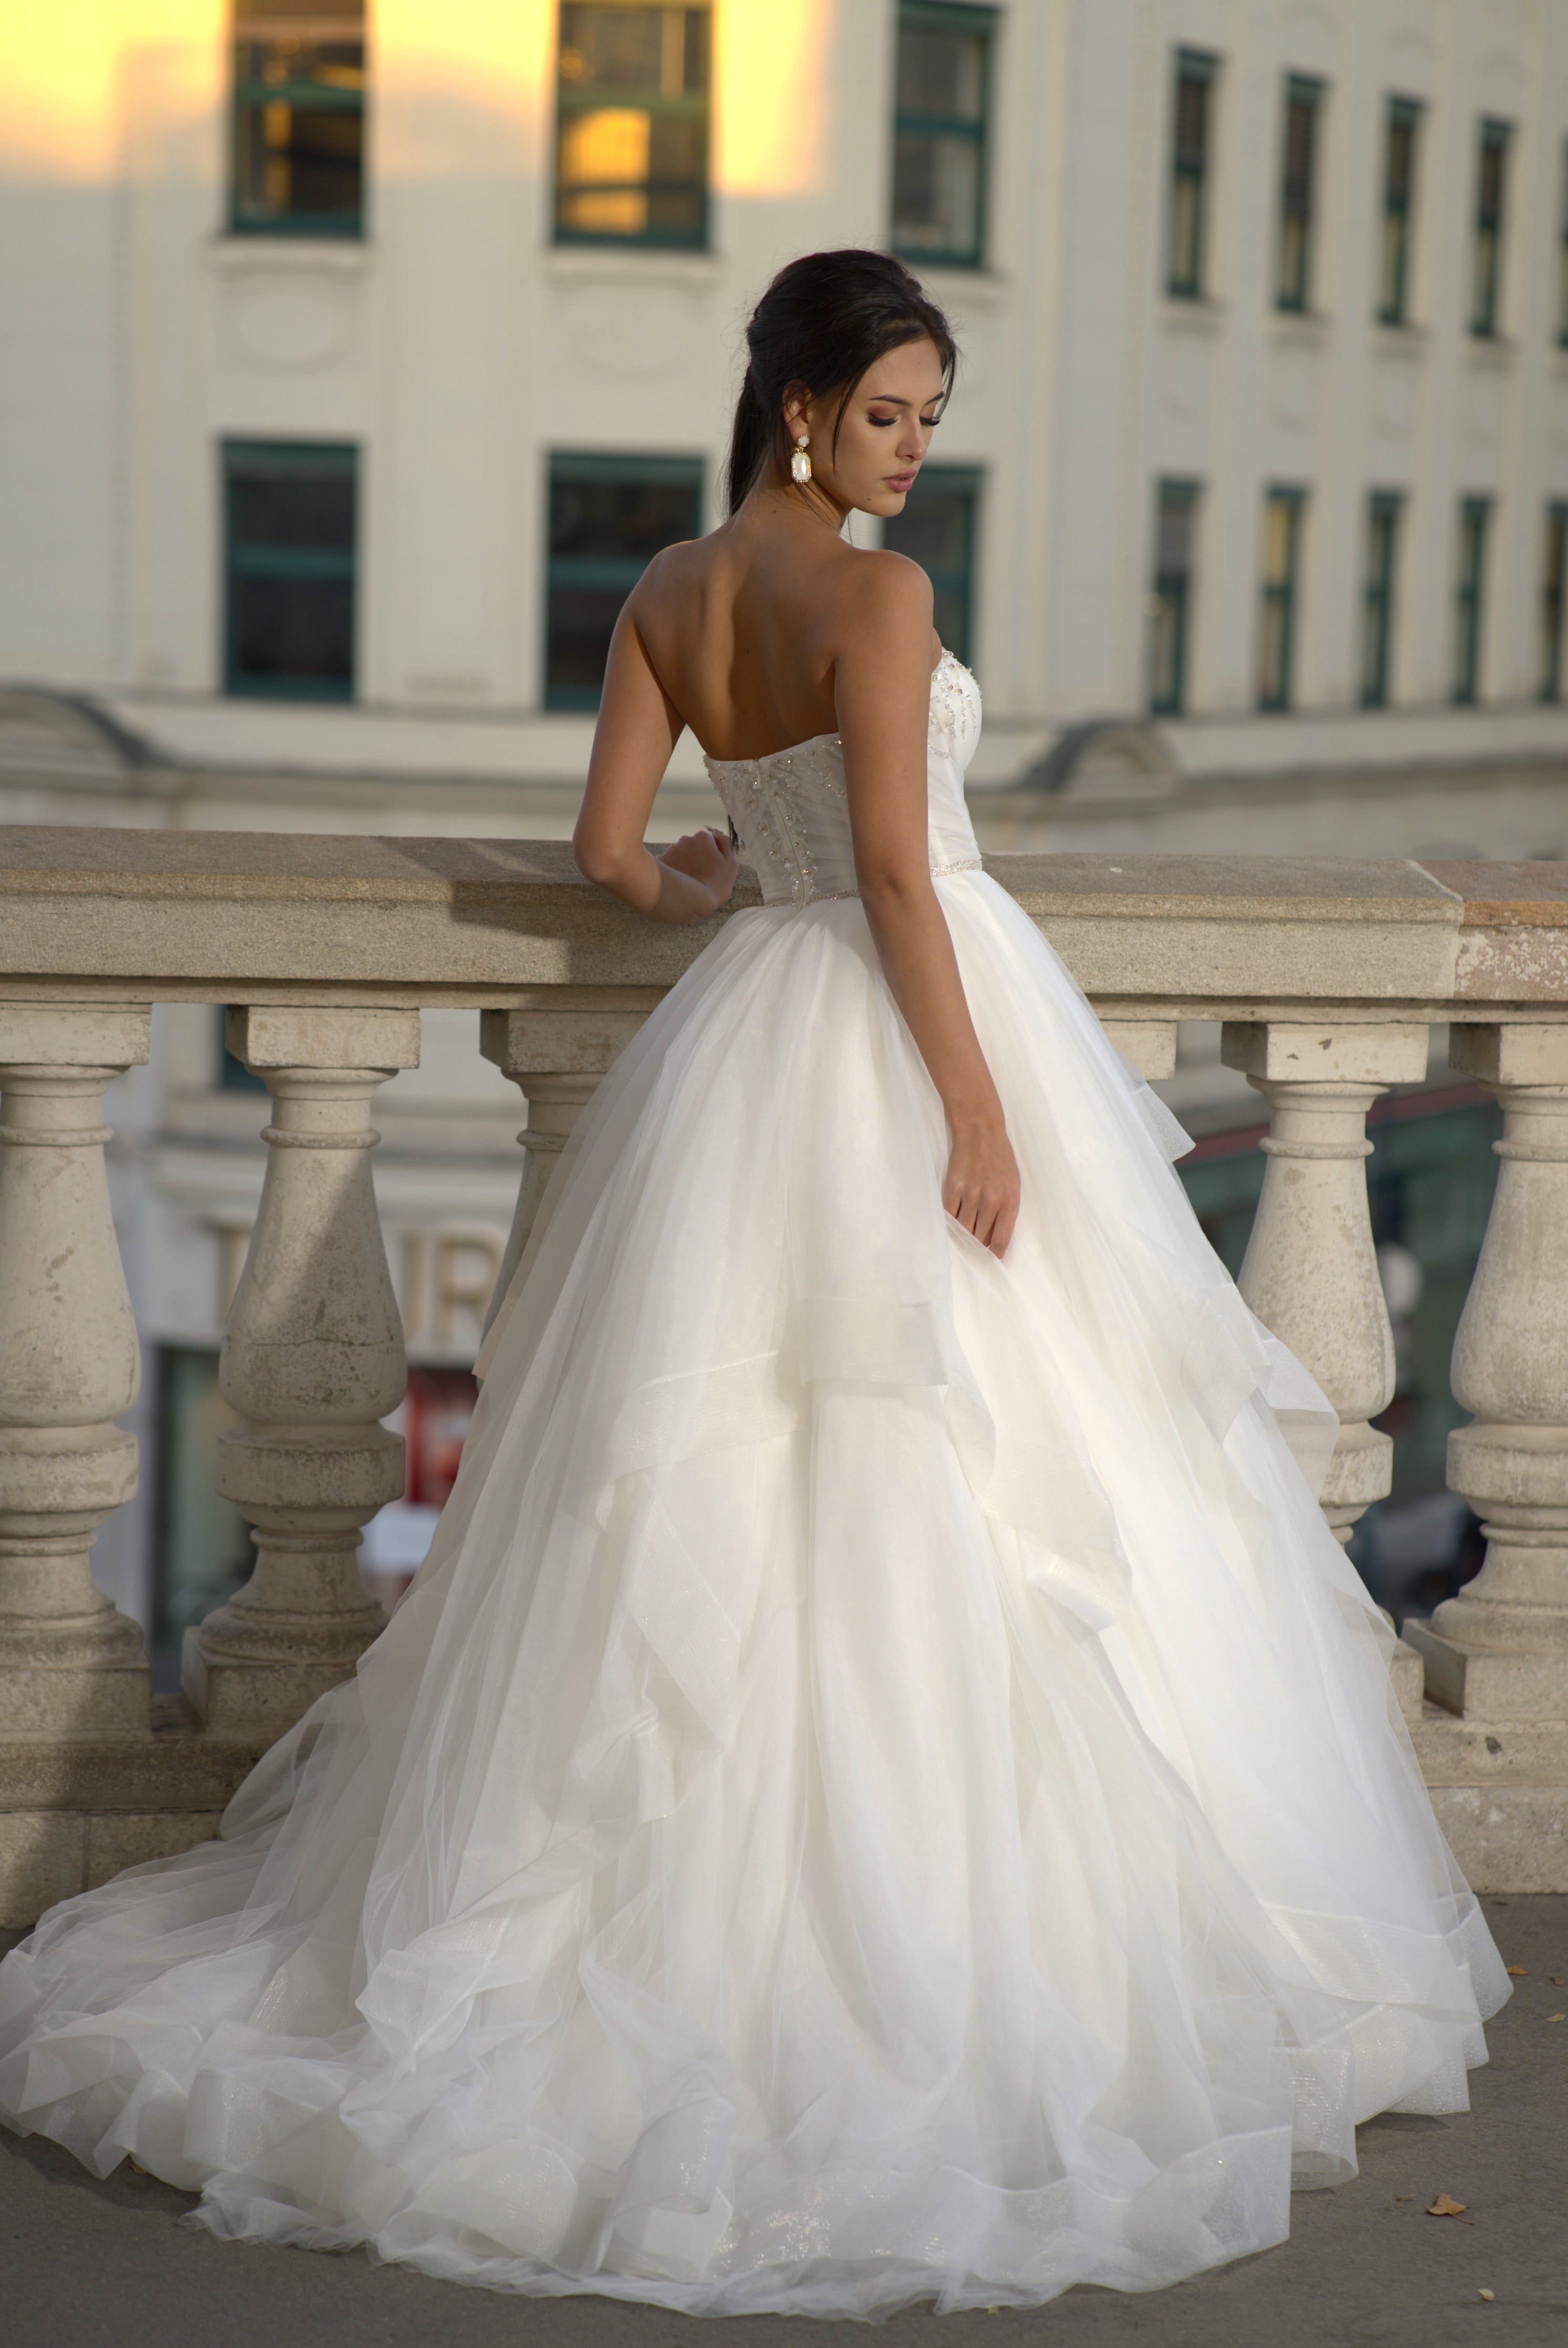 Bella - Strapless Sweetheart Ball Gown with Ruffle Skirt - Maxima Bridal